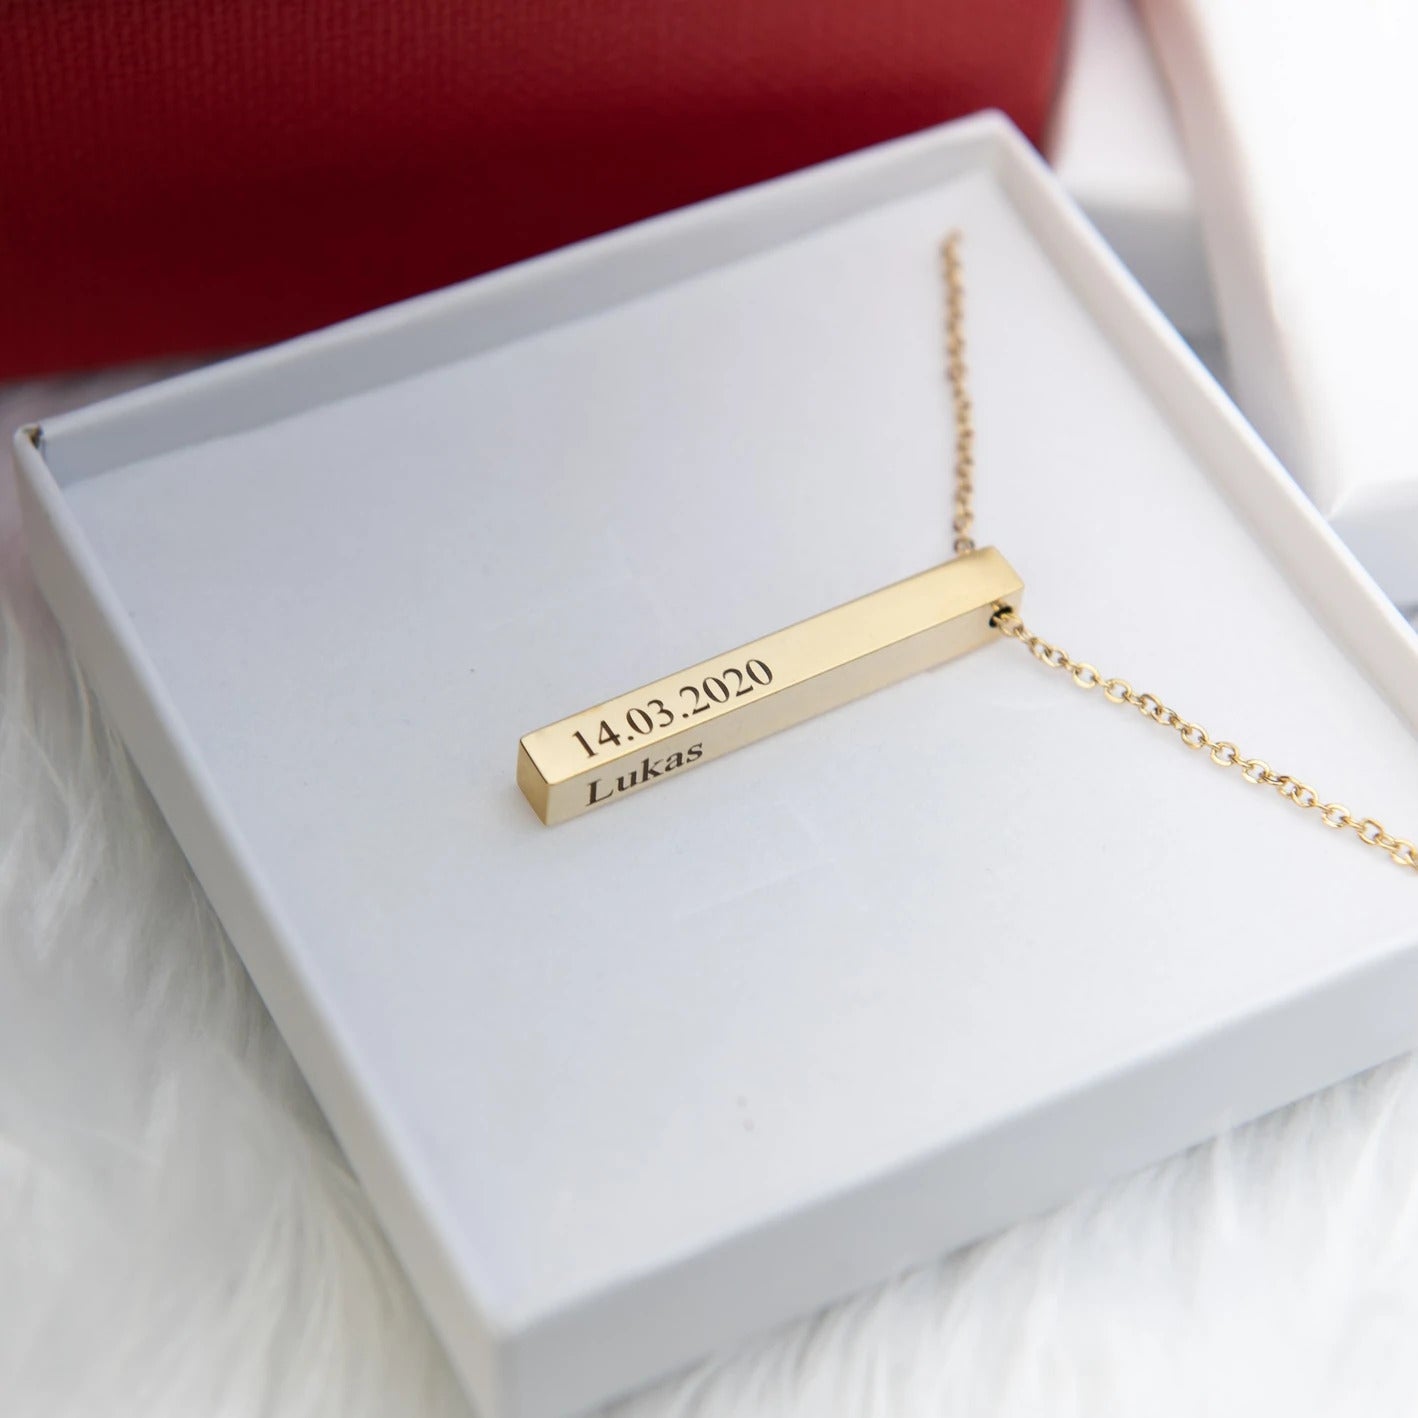 Pillar Necklace with Engraving